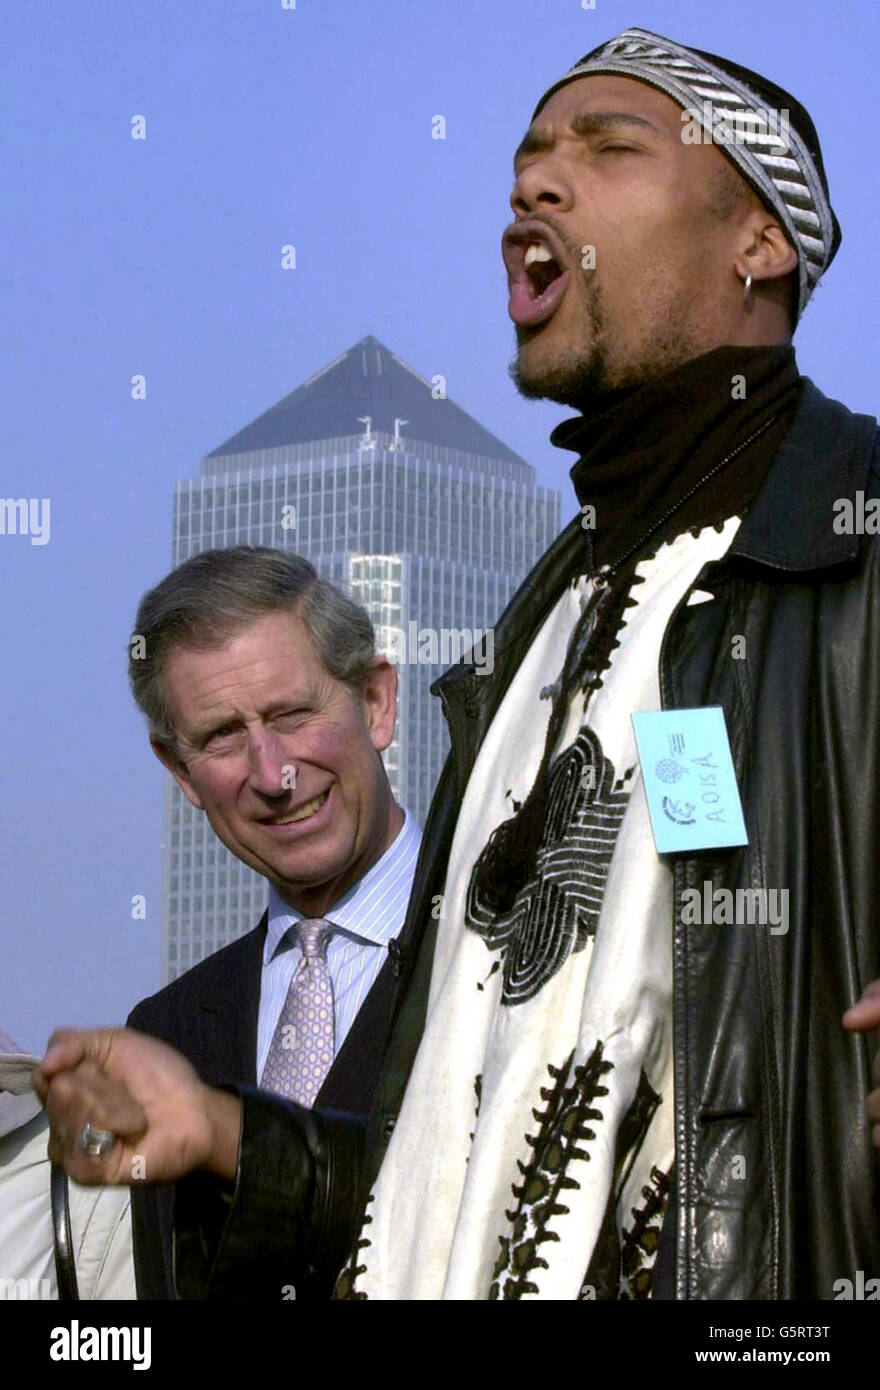 The Prince of Wales listens to poet, Adisa, sing a luck poem, with Canary Wharf behind him, during a visit to Surrey Docks City Farm, South East London. Stock Photo